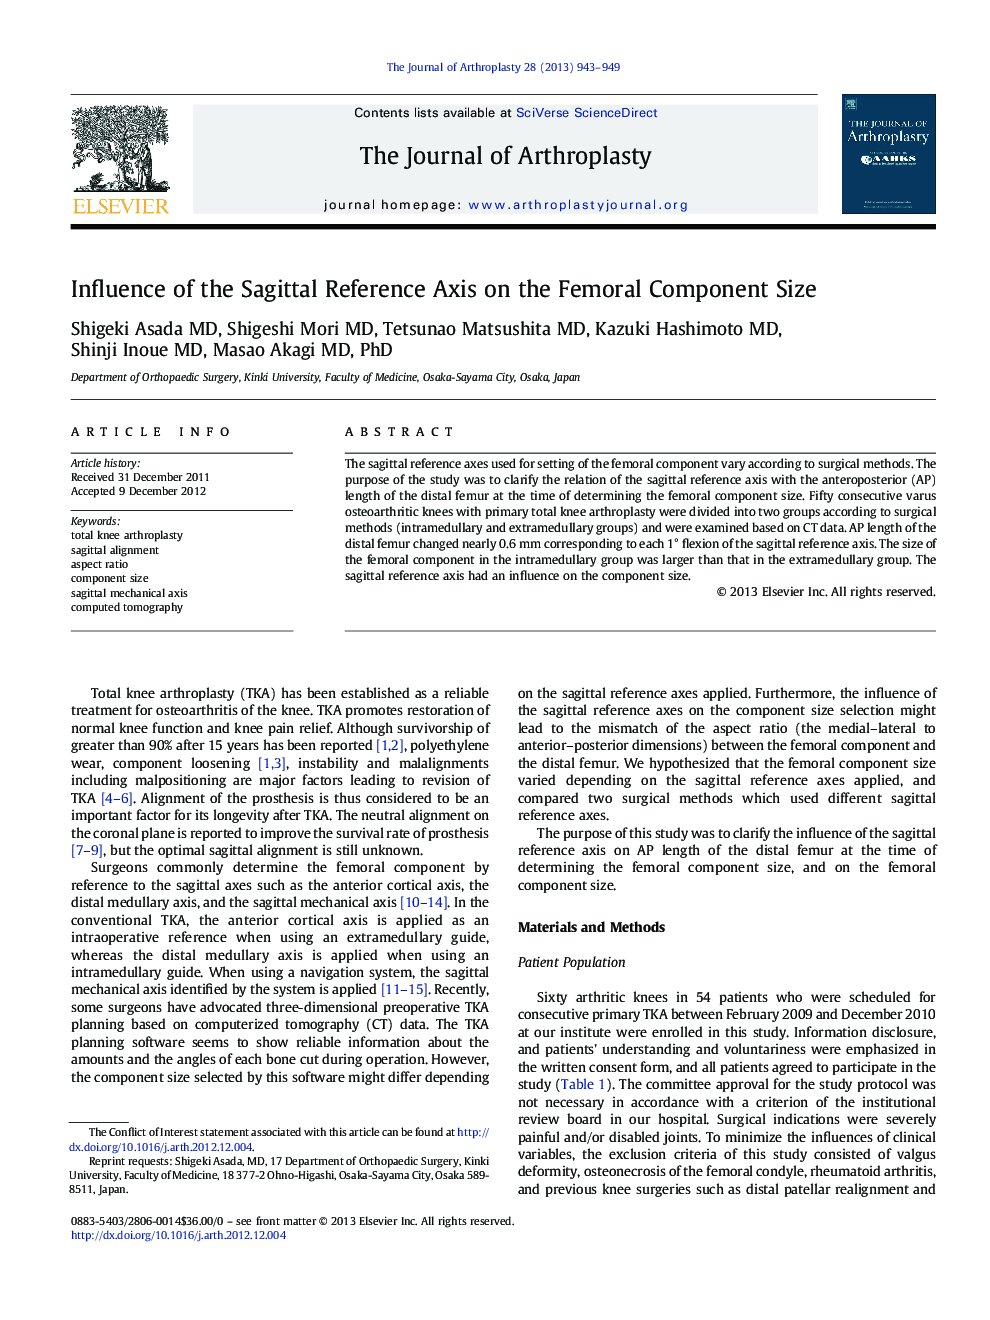 Influence of the Sagittal Reference Axis on the Femoral Component Size